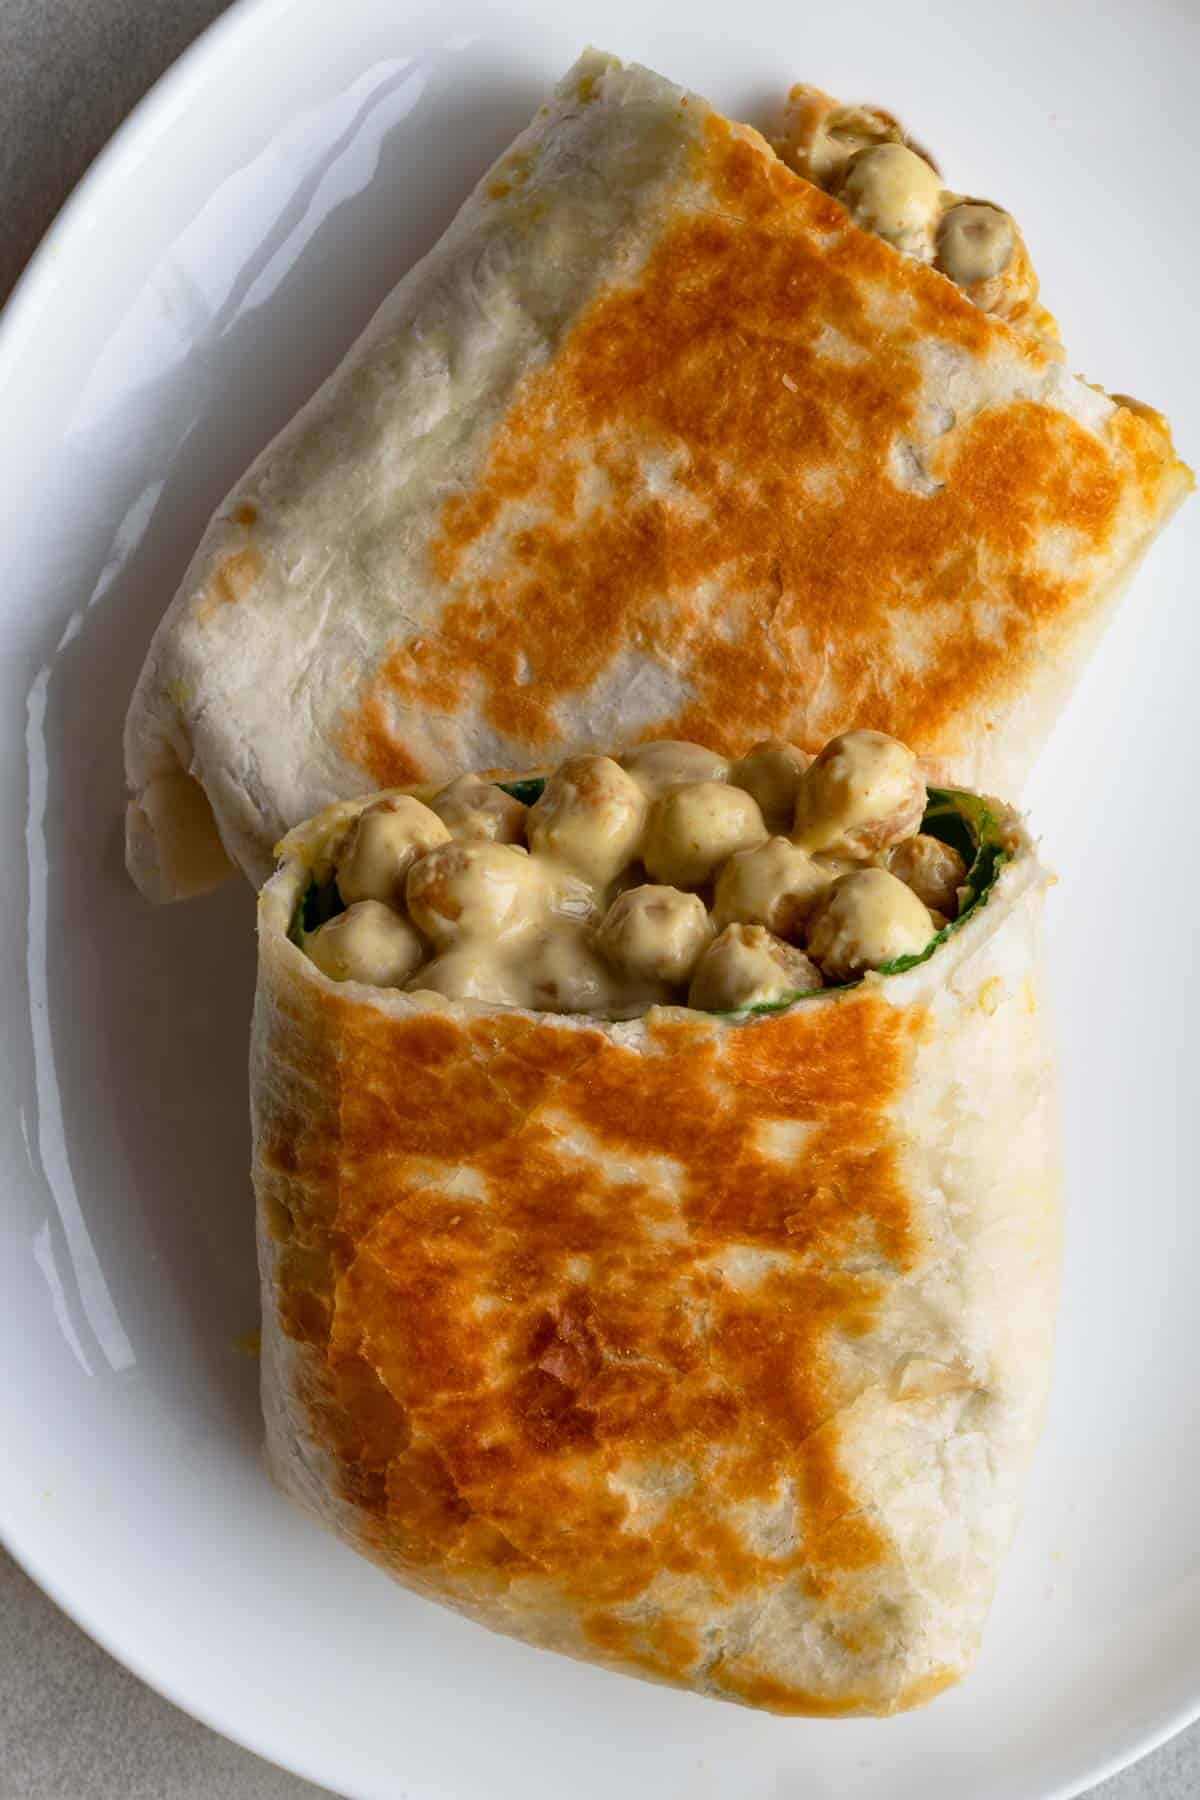 Crispy wrap cut in half with a creamy chickpea and collard green filling.